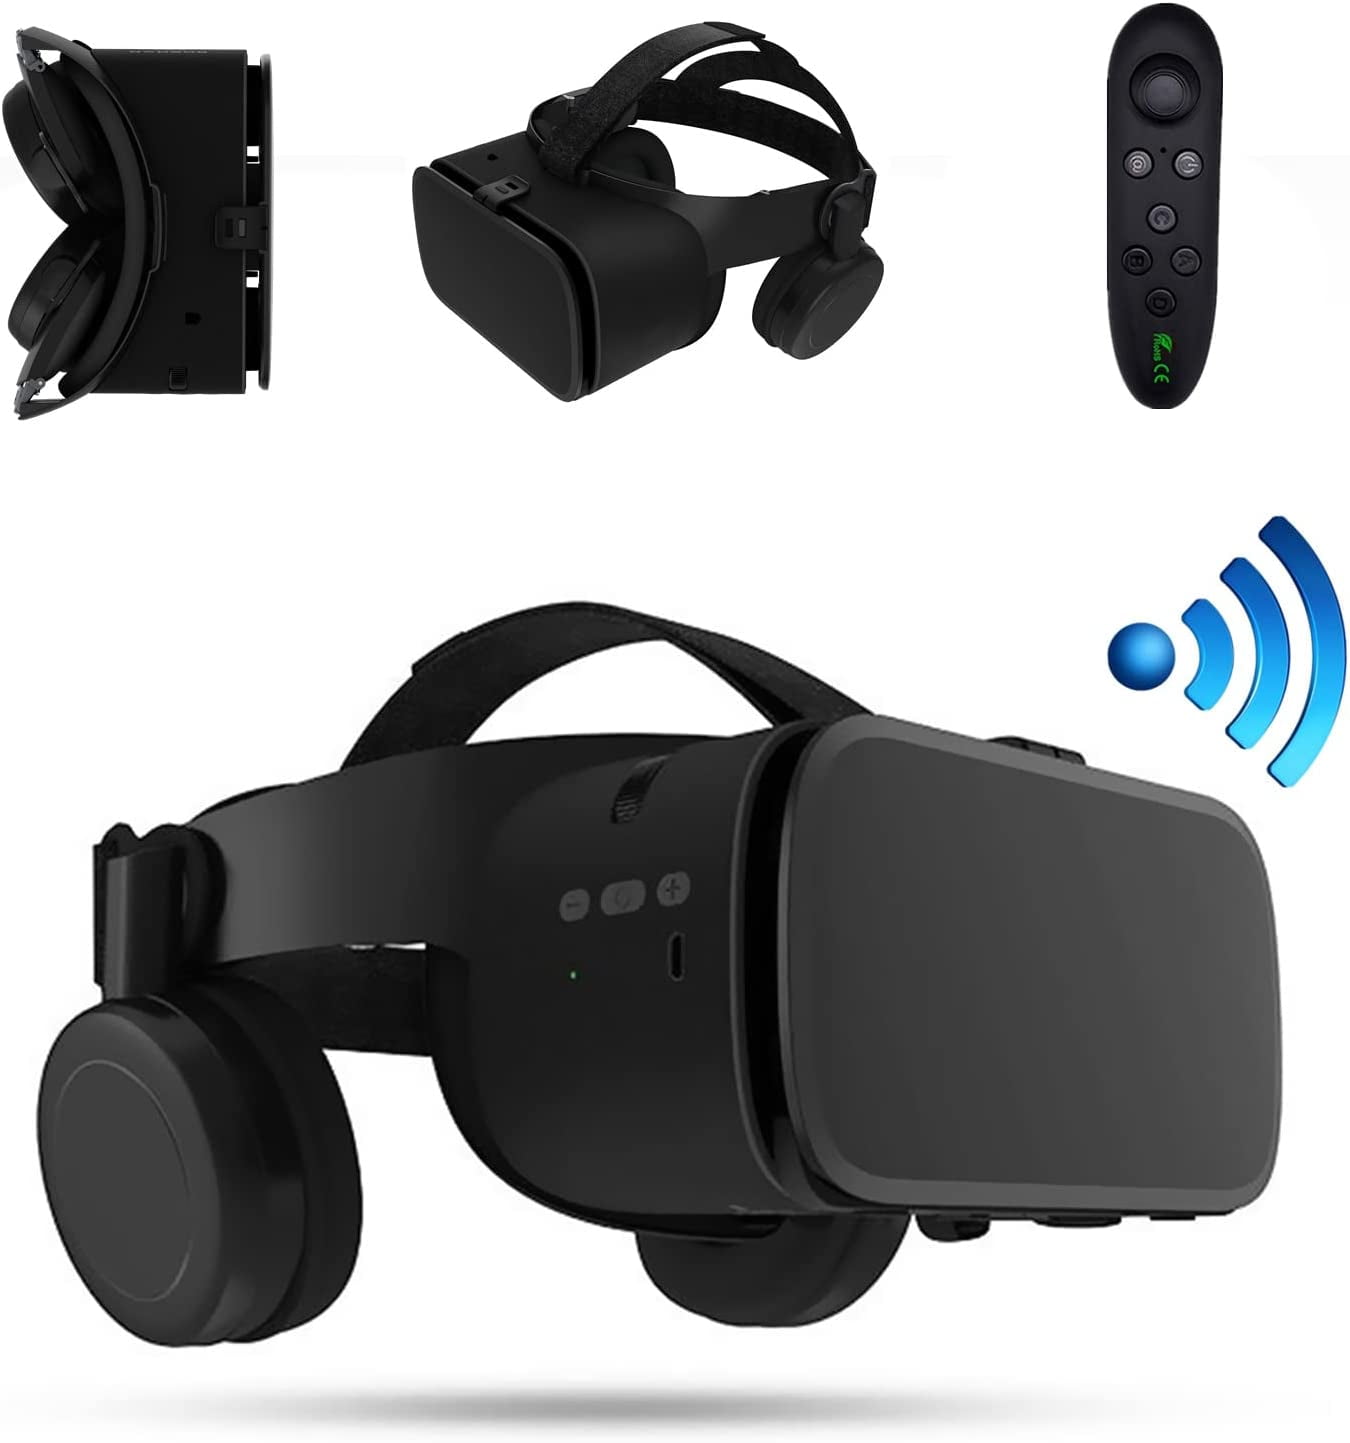 VR Virtual Reality Goggle with Wireless Remote Controller, 3D Glasses for 3D Movies Video Play Games, VR Set for IOS Android Phone for iPhone 13 12 11 Pro Mini X R S